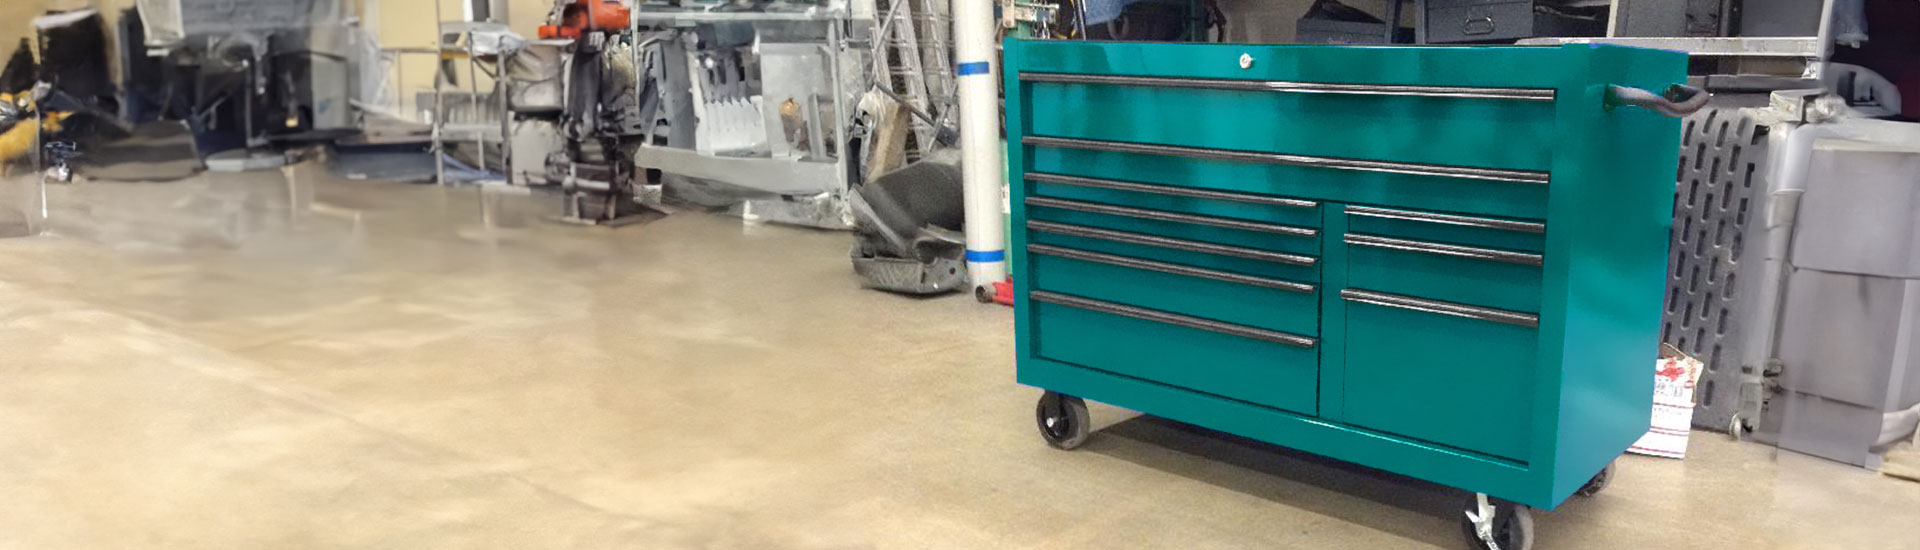 Teal Tool Cabinet Wraps